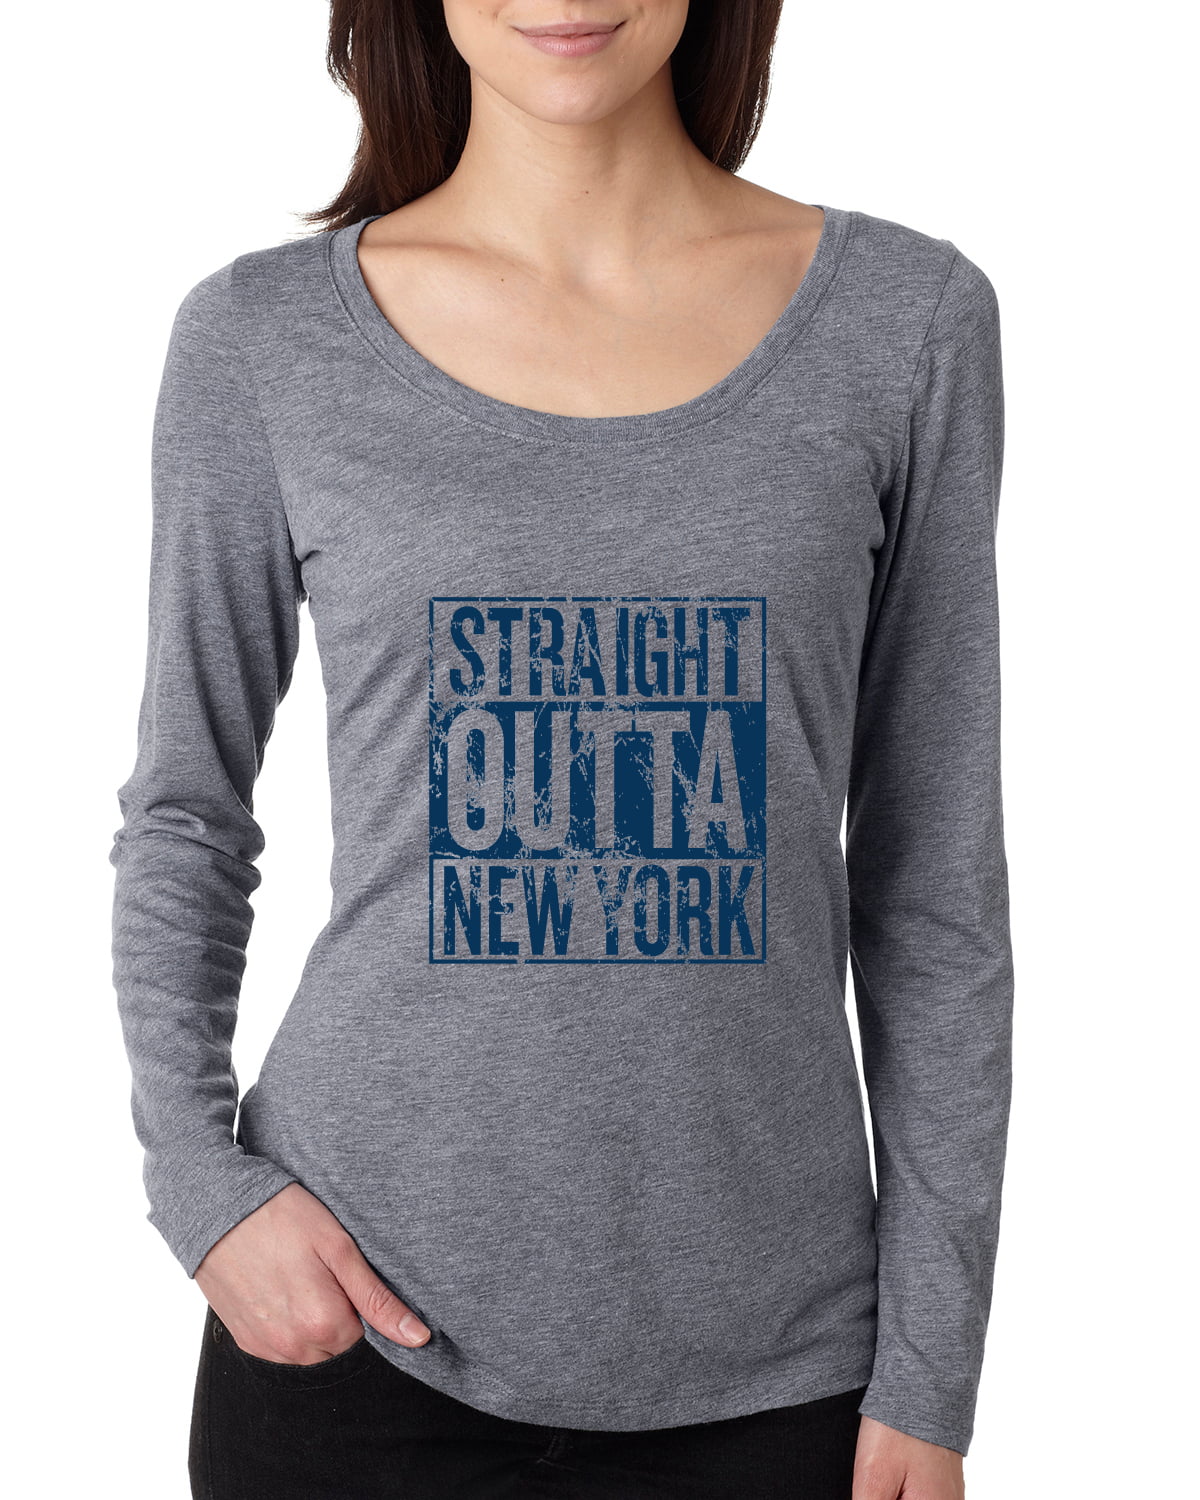 NY Baseball Fans. Too Sexy to Be A Yankees Fan Ladies Shirt (XS-2X)